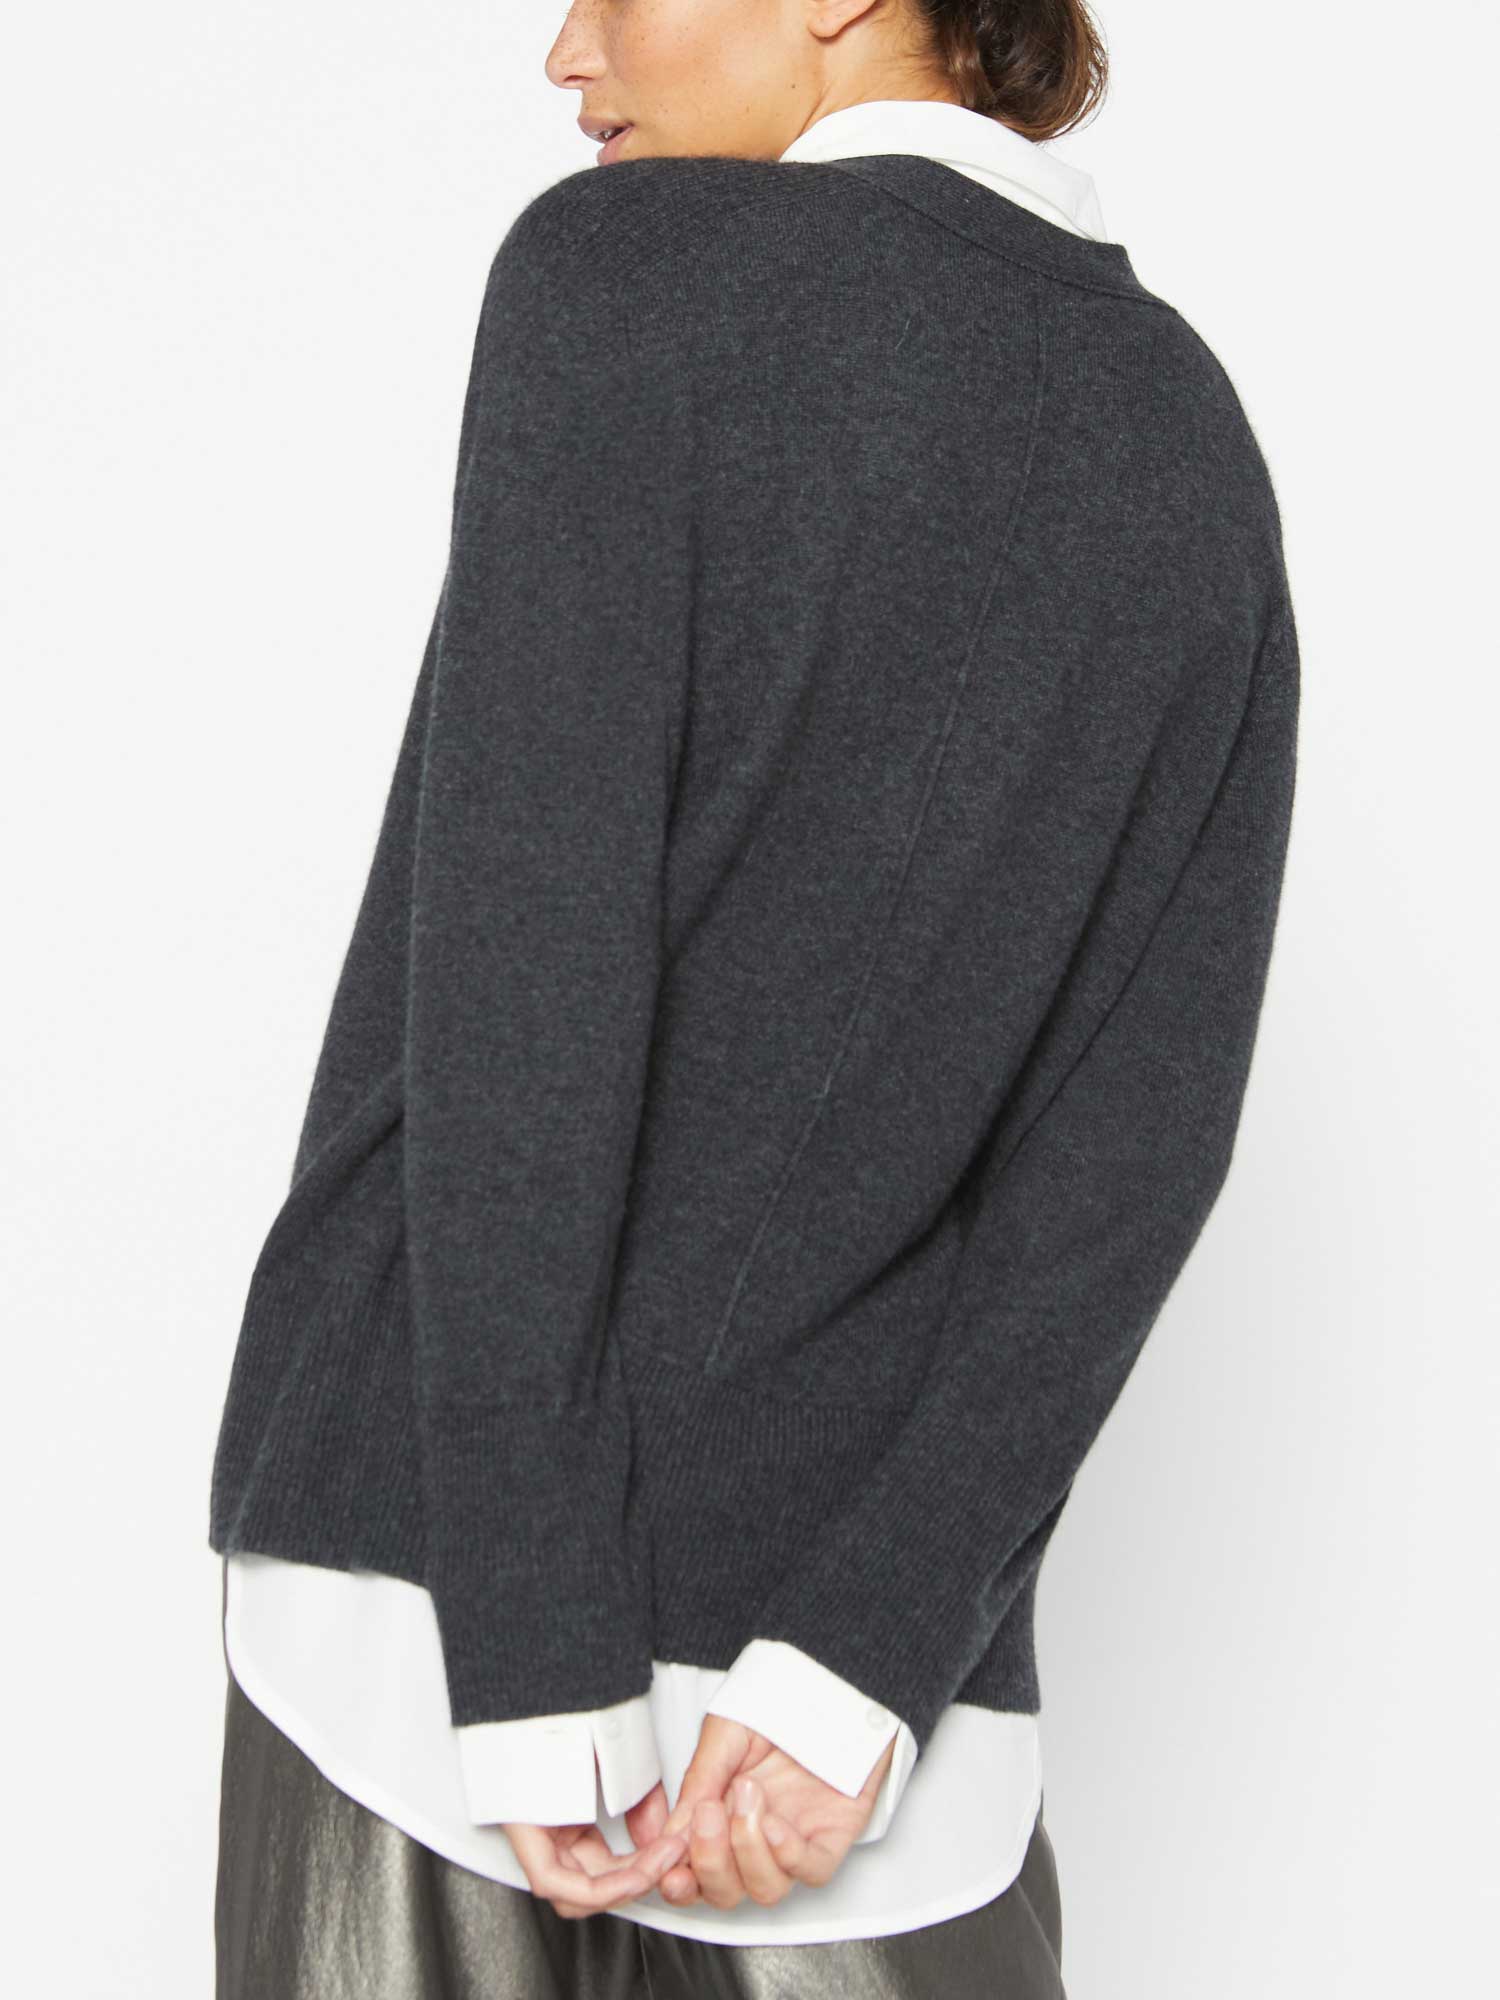 The Callie Layered Looker Cardigan